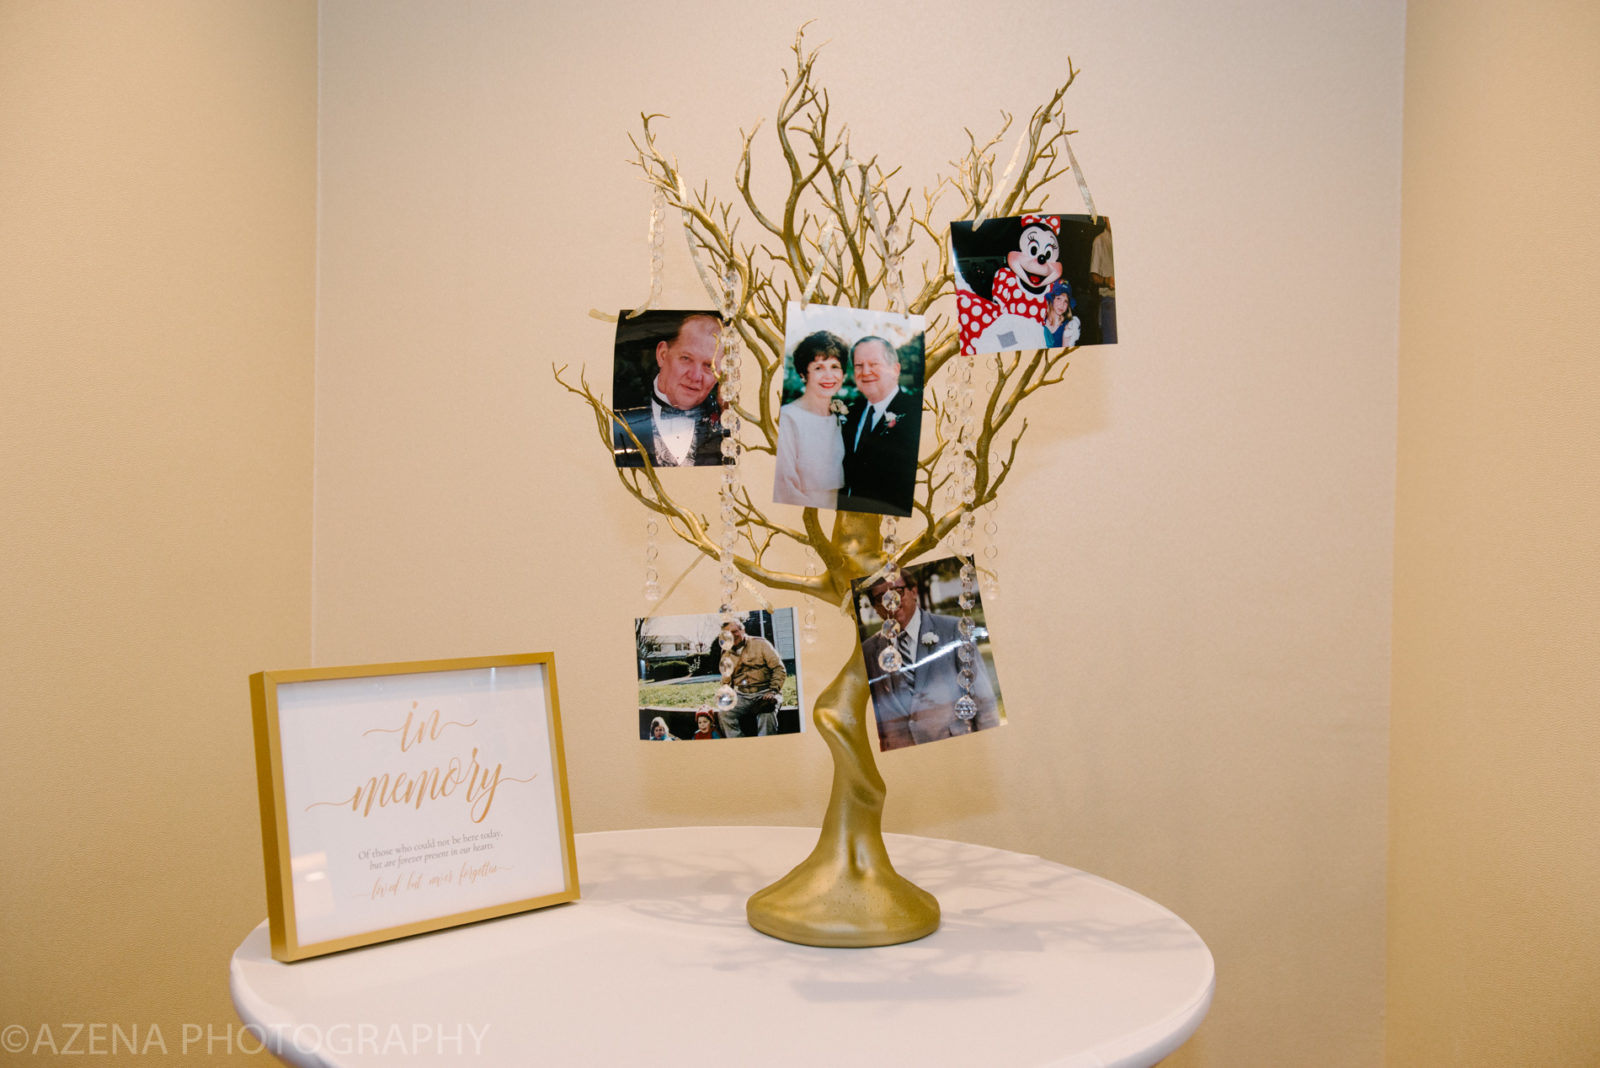 family tree memories of lost ones at wedding